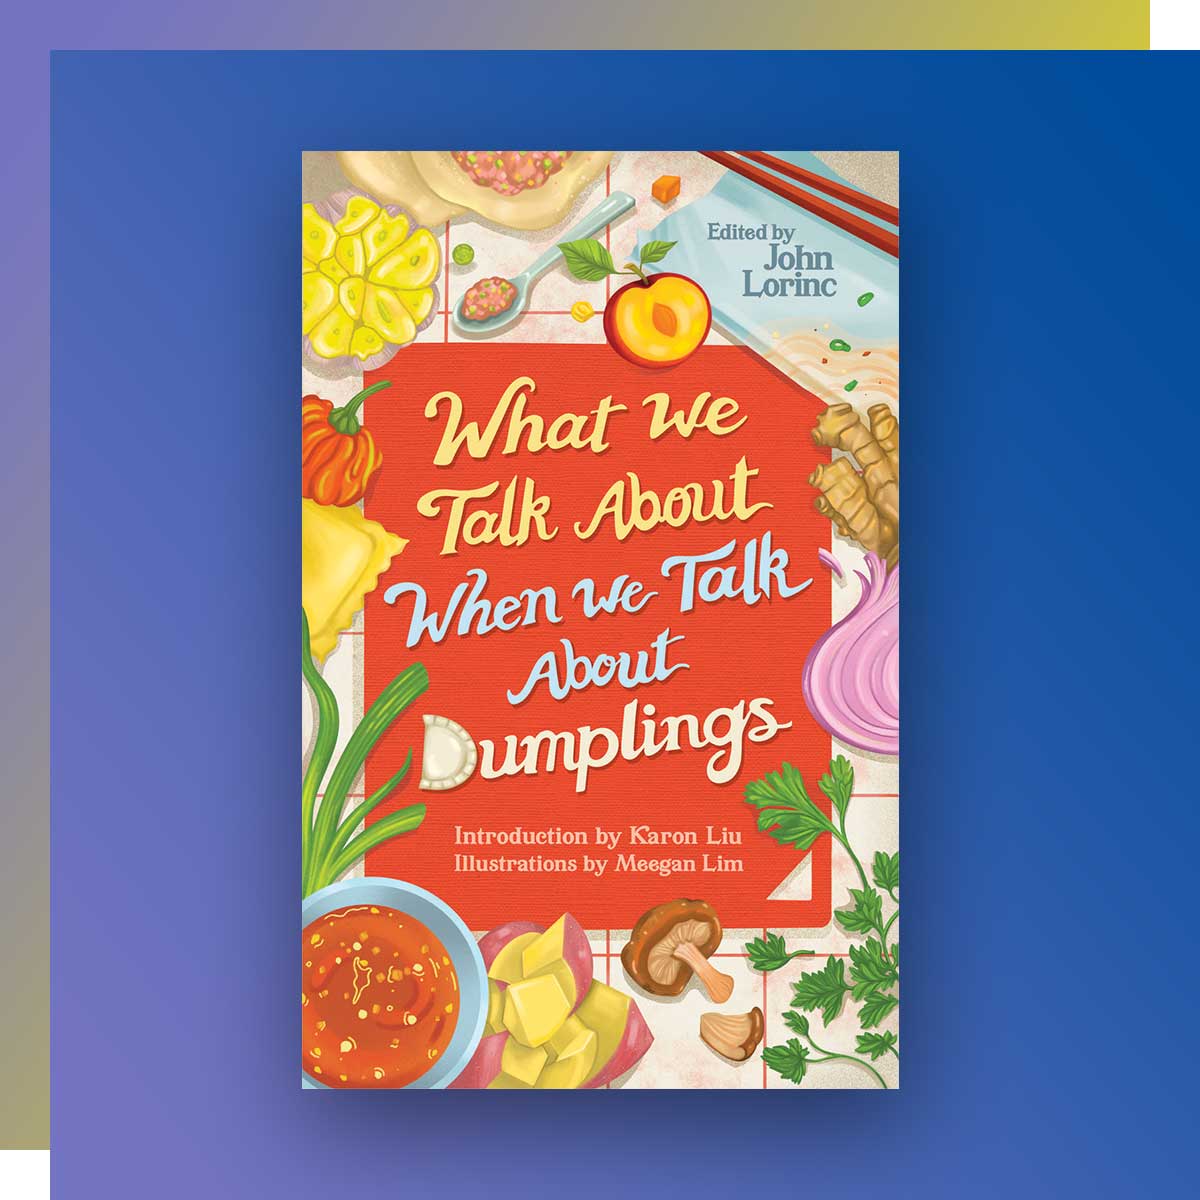 What We Talk About When We Talk About Dumplings by Dr. Cheryl Thompson